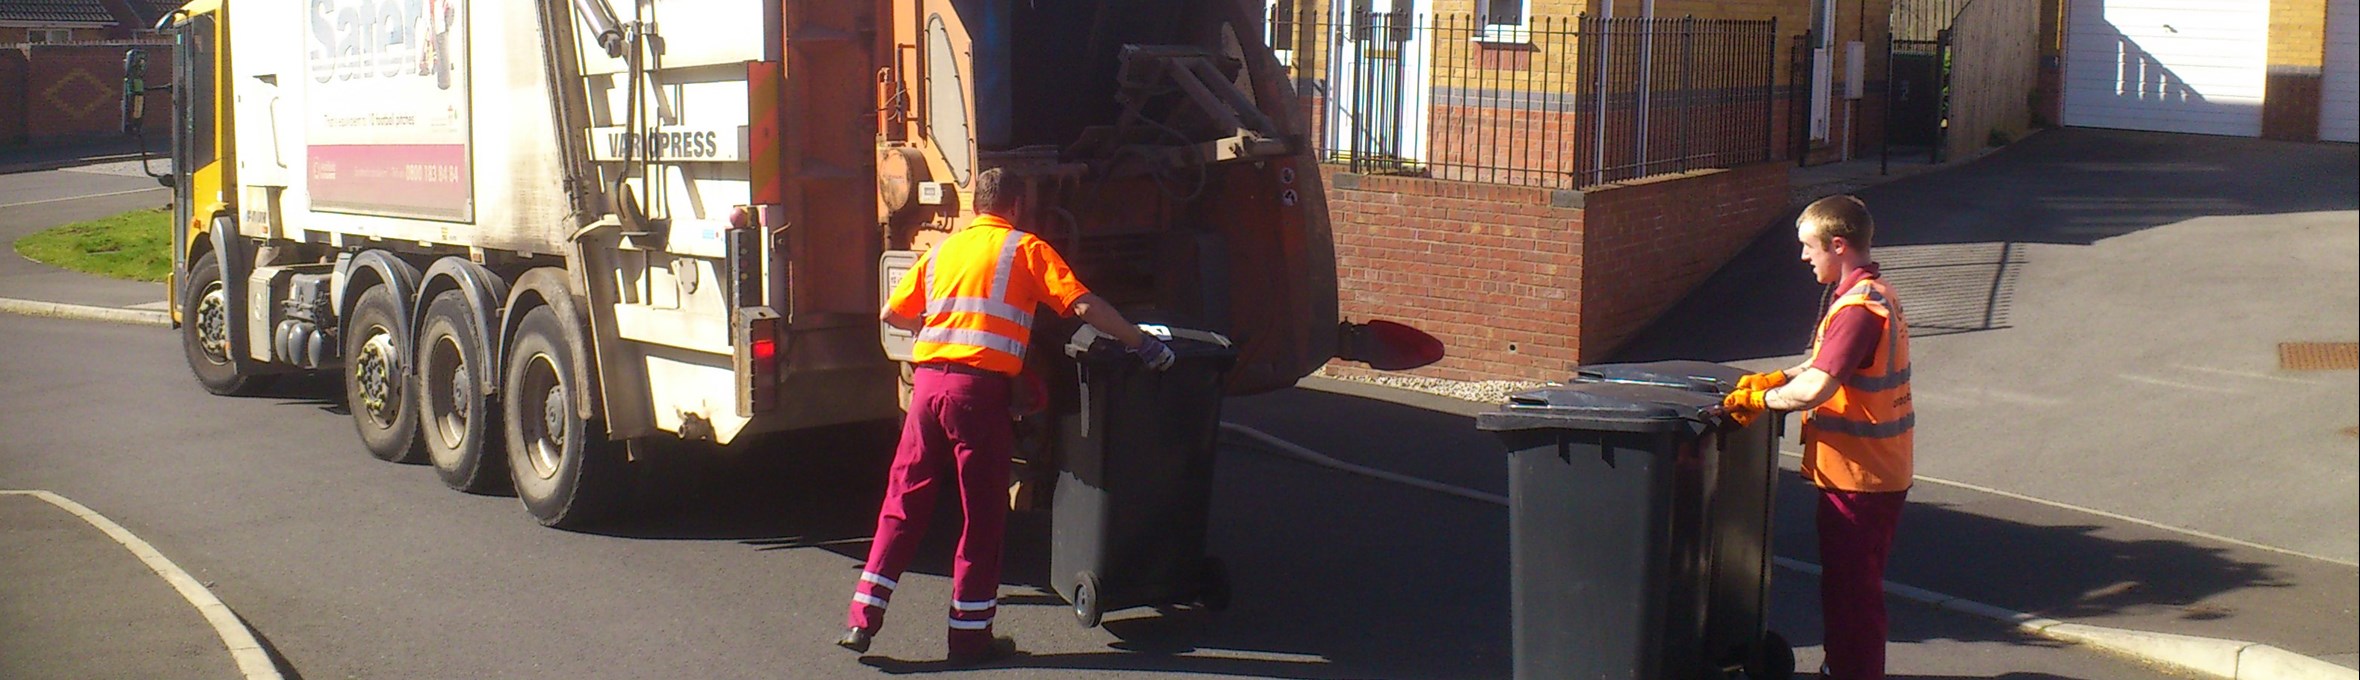 Refuge lorry collecting waste outside house with workers 